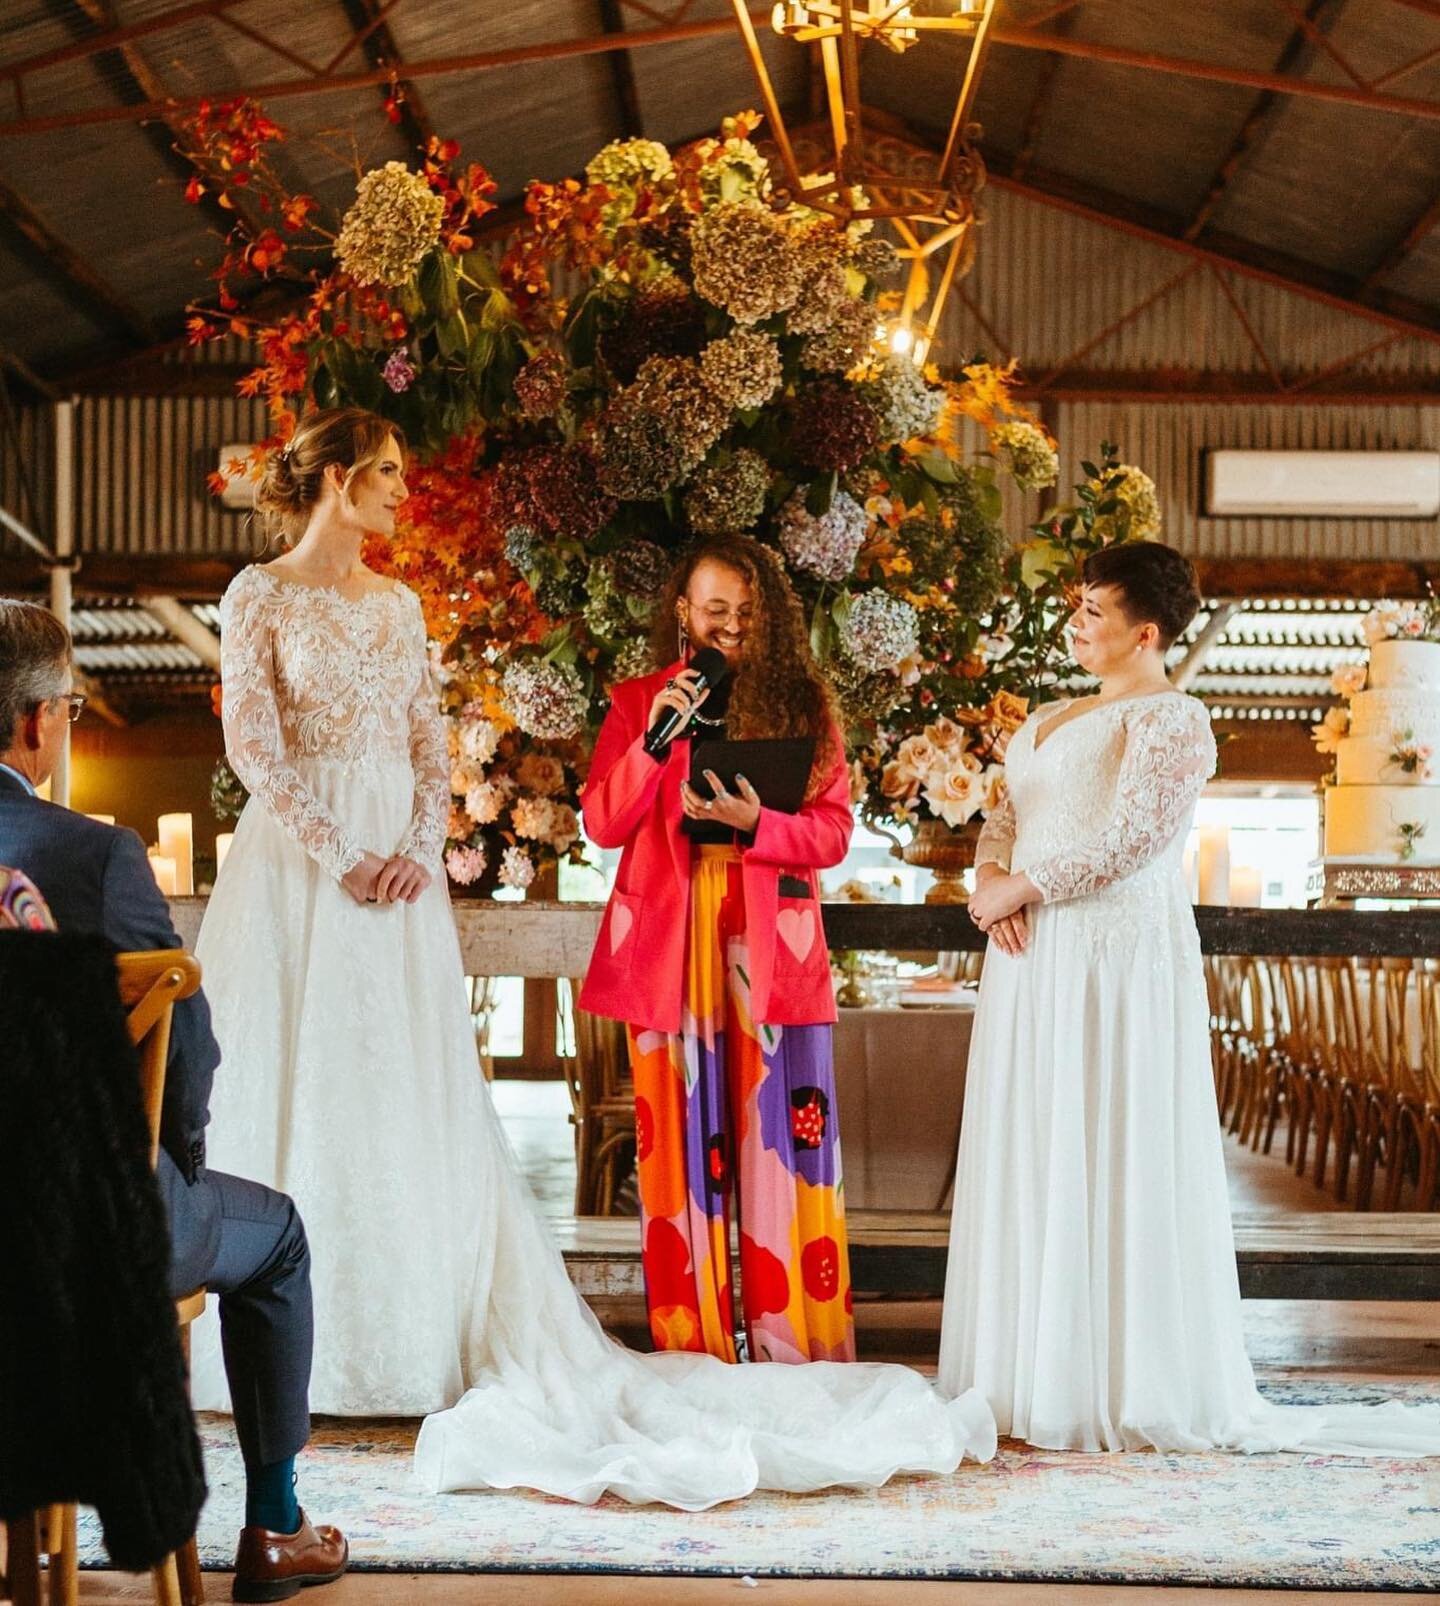 Could it get any more gorgeous than this? Queer and trans love, joy and celebration! A deep honour to marry these two angels to each other after a whopping 18 years together! The entire day (and their relationship) was nourished and supported by comm